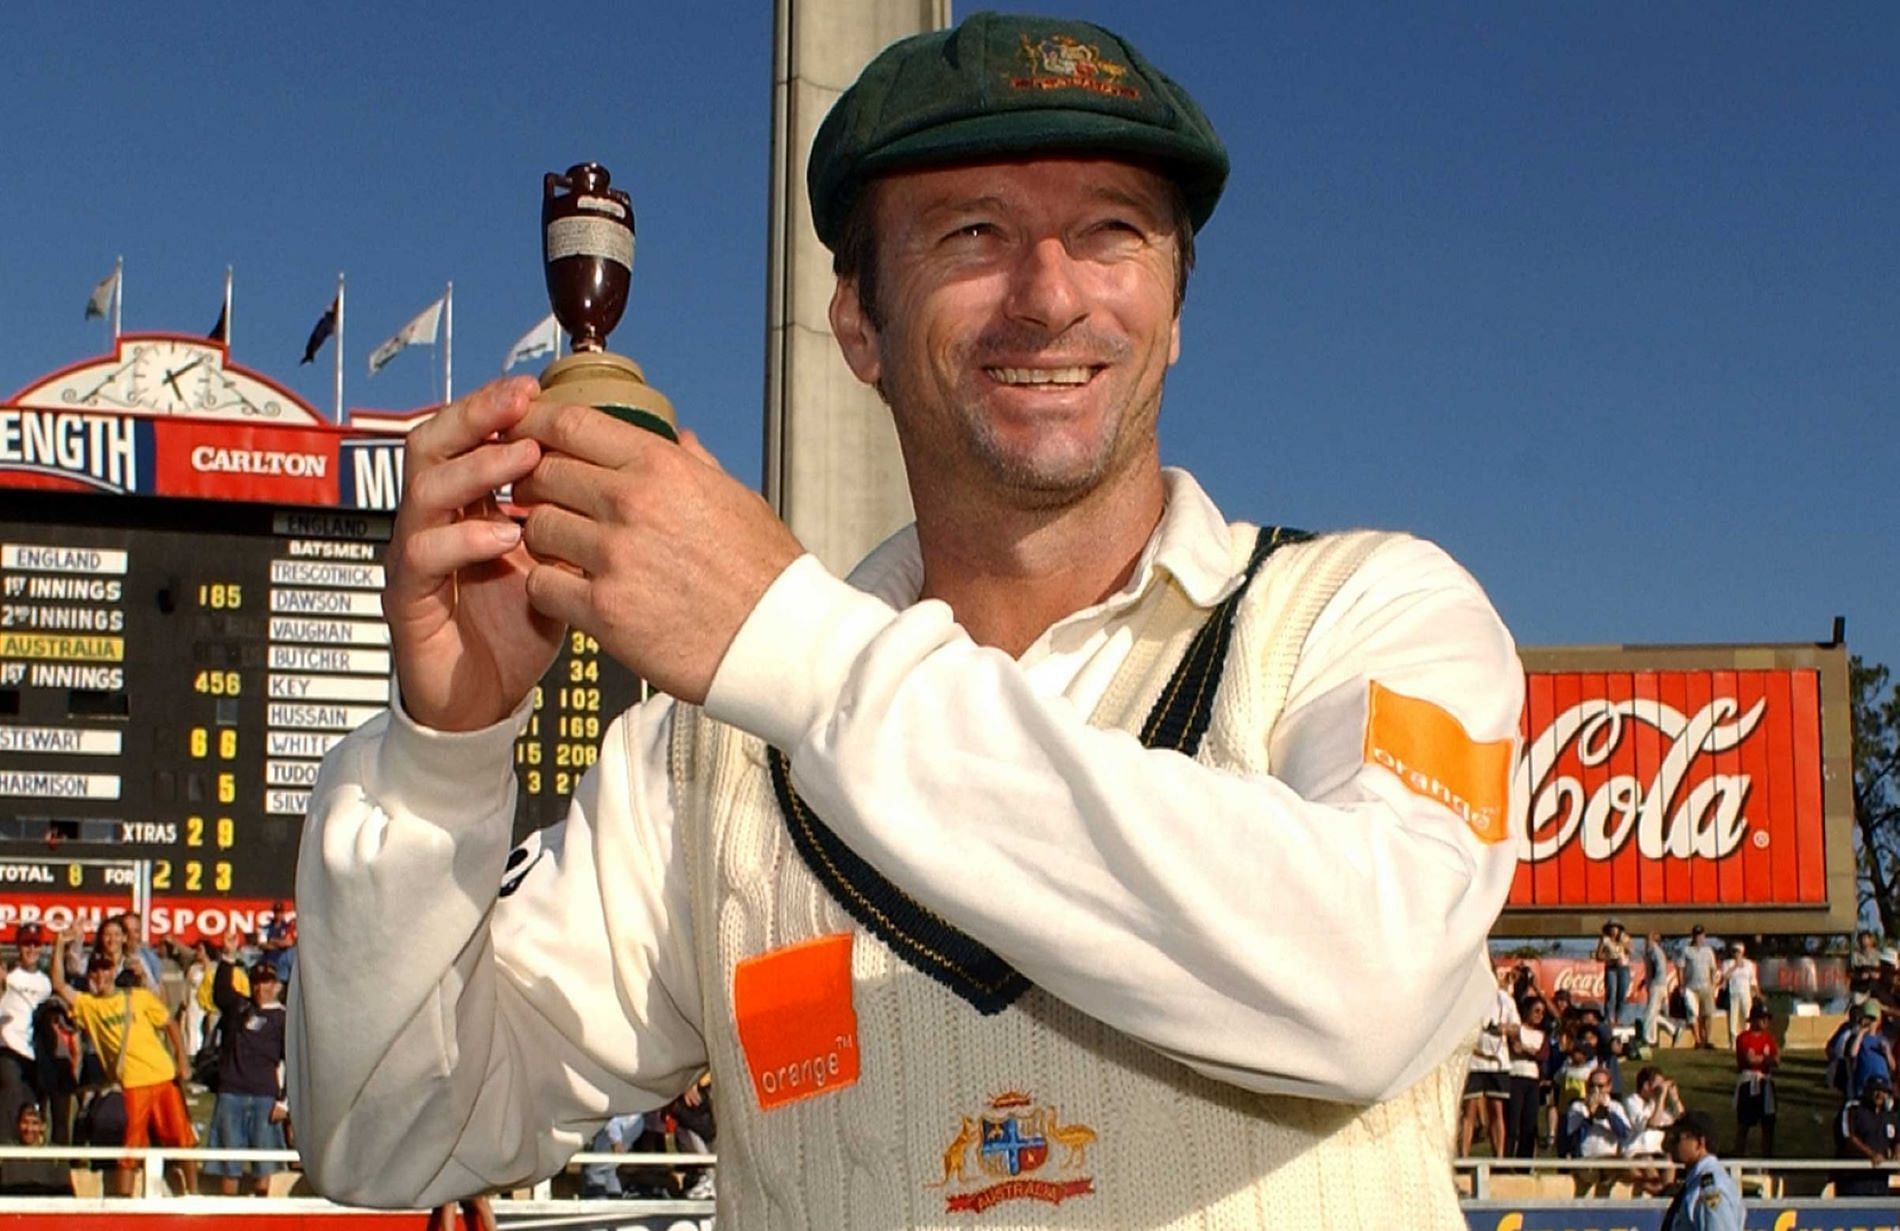 Steve Waugh captained Australia to Ashes dominance in the early 2000s